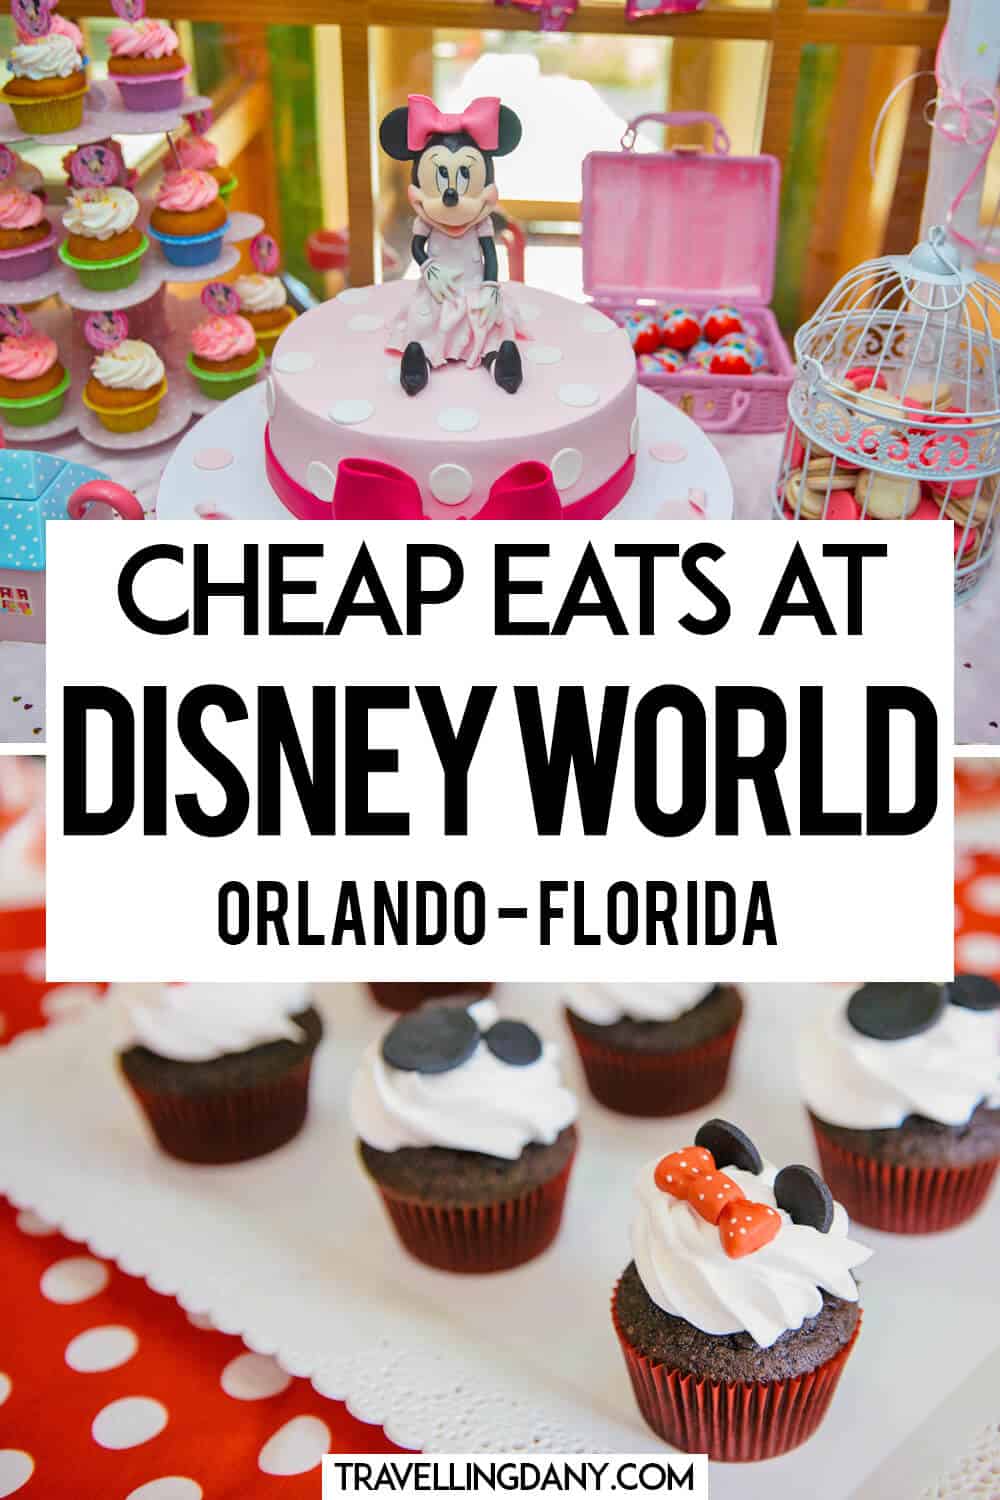 A quick list of what I think are some of the best cheap Disney World eats. We're going to go all over Disney World for these, so grab a map! All the Disney food options are under $10 and under $20: eating at Disney on a budget is a thing!